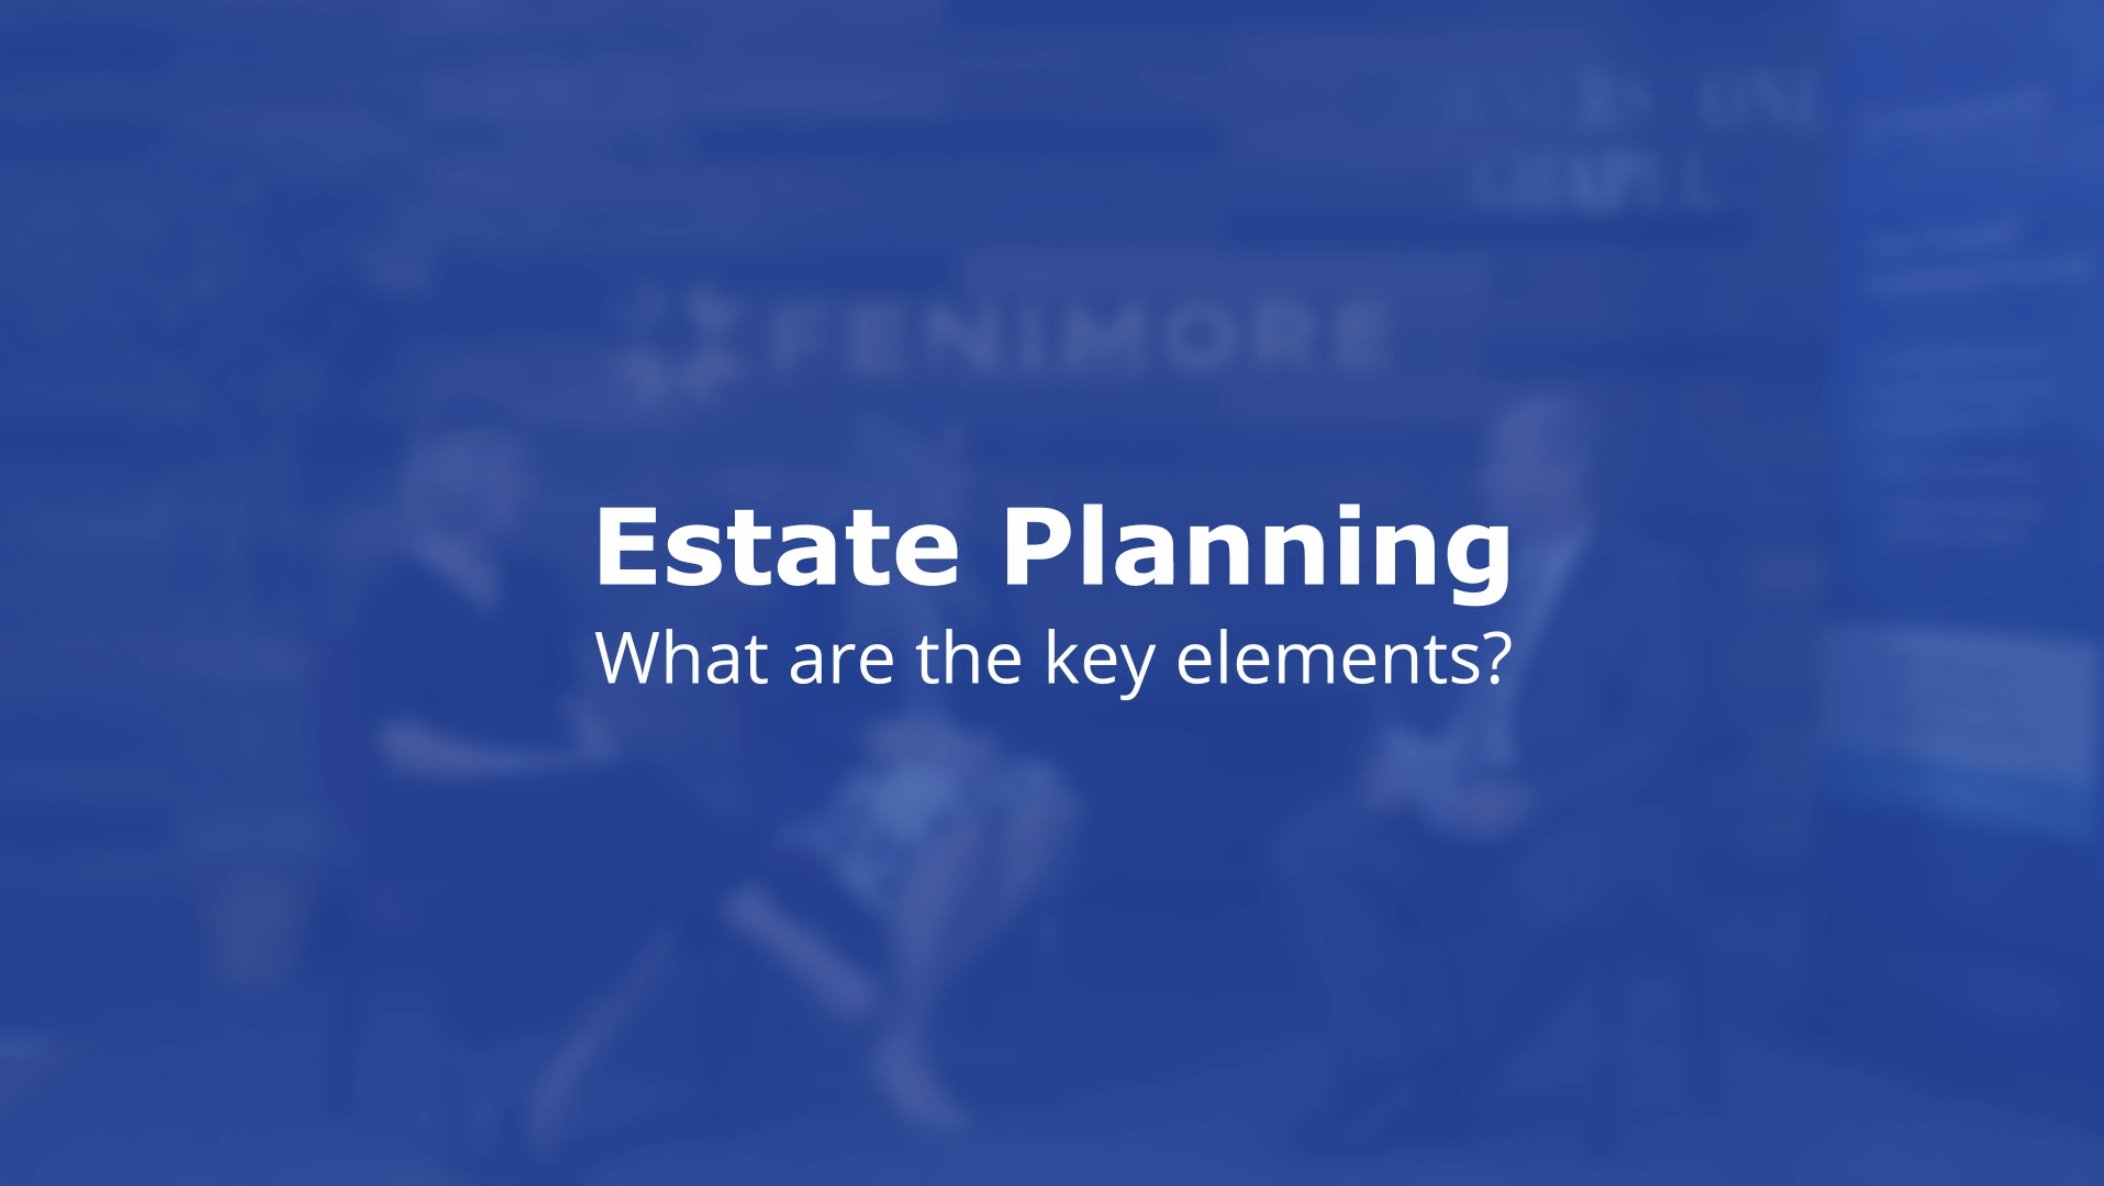 ESTATE PLANNING: What are the key elements? 